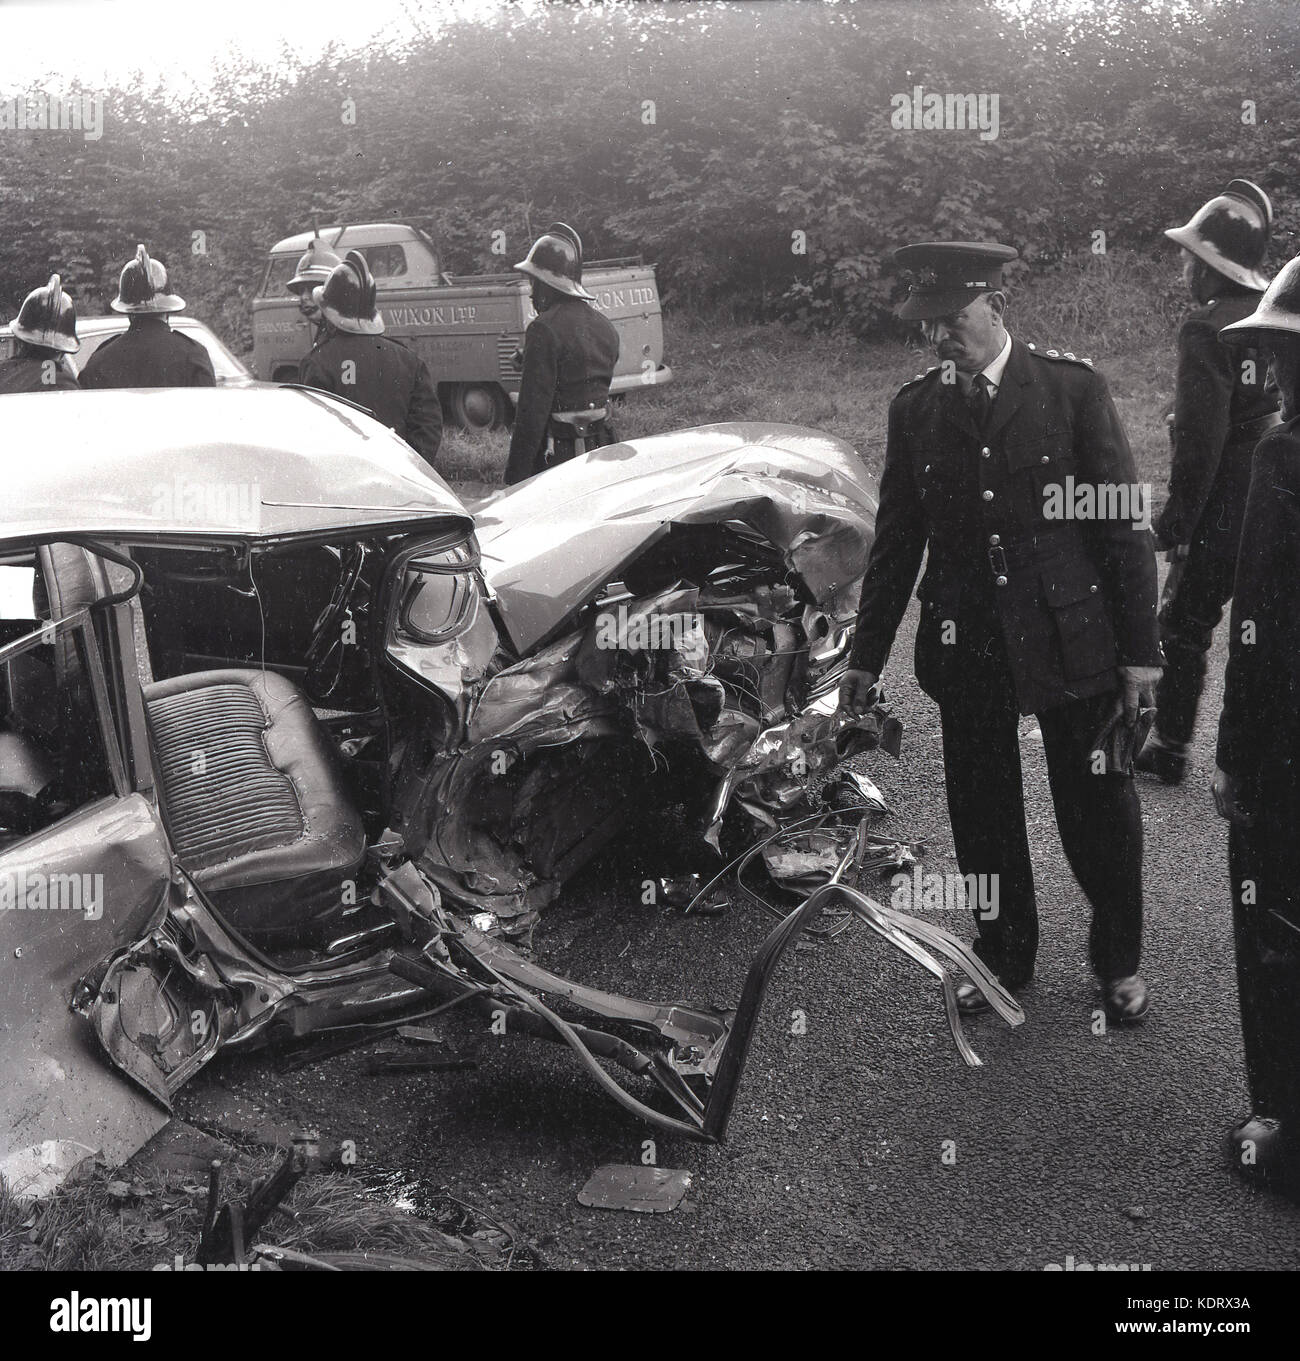 1960s, Buckinghamshire, UK, poiice and firemen with helmets at the scene of a rural road accident and a severely smashed up motorcar lying on the road. Stock Photo